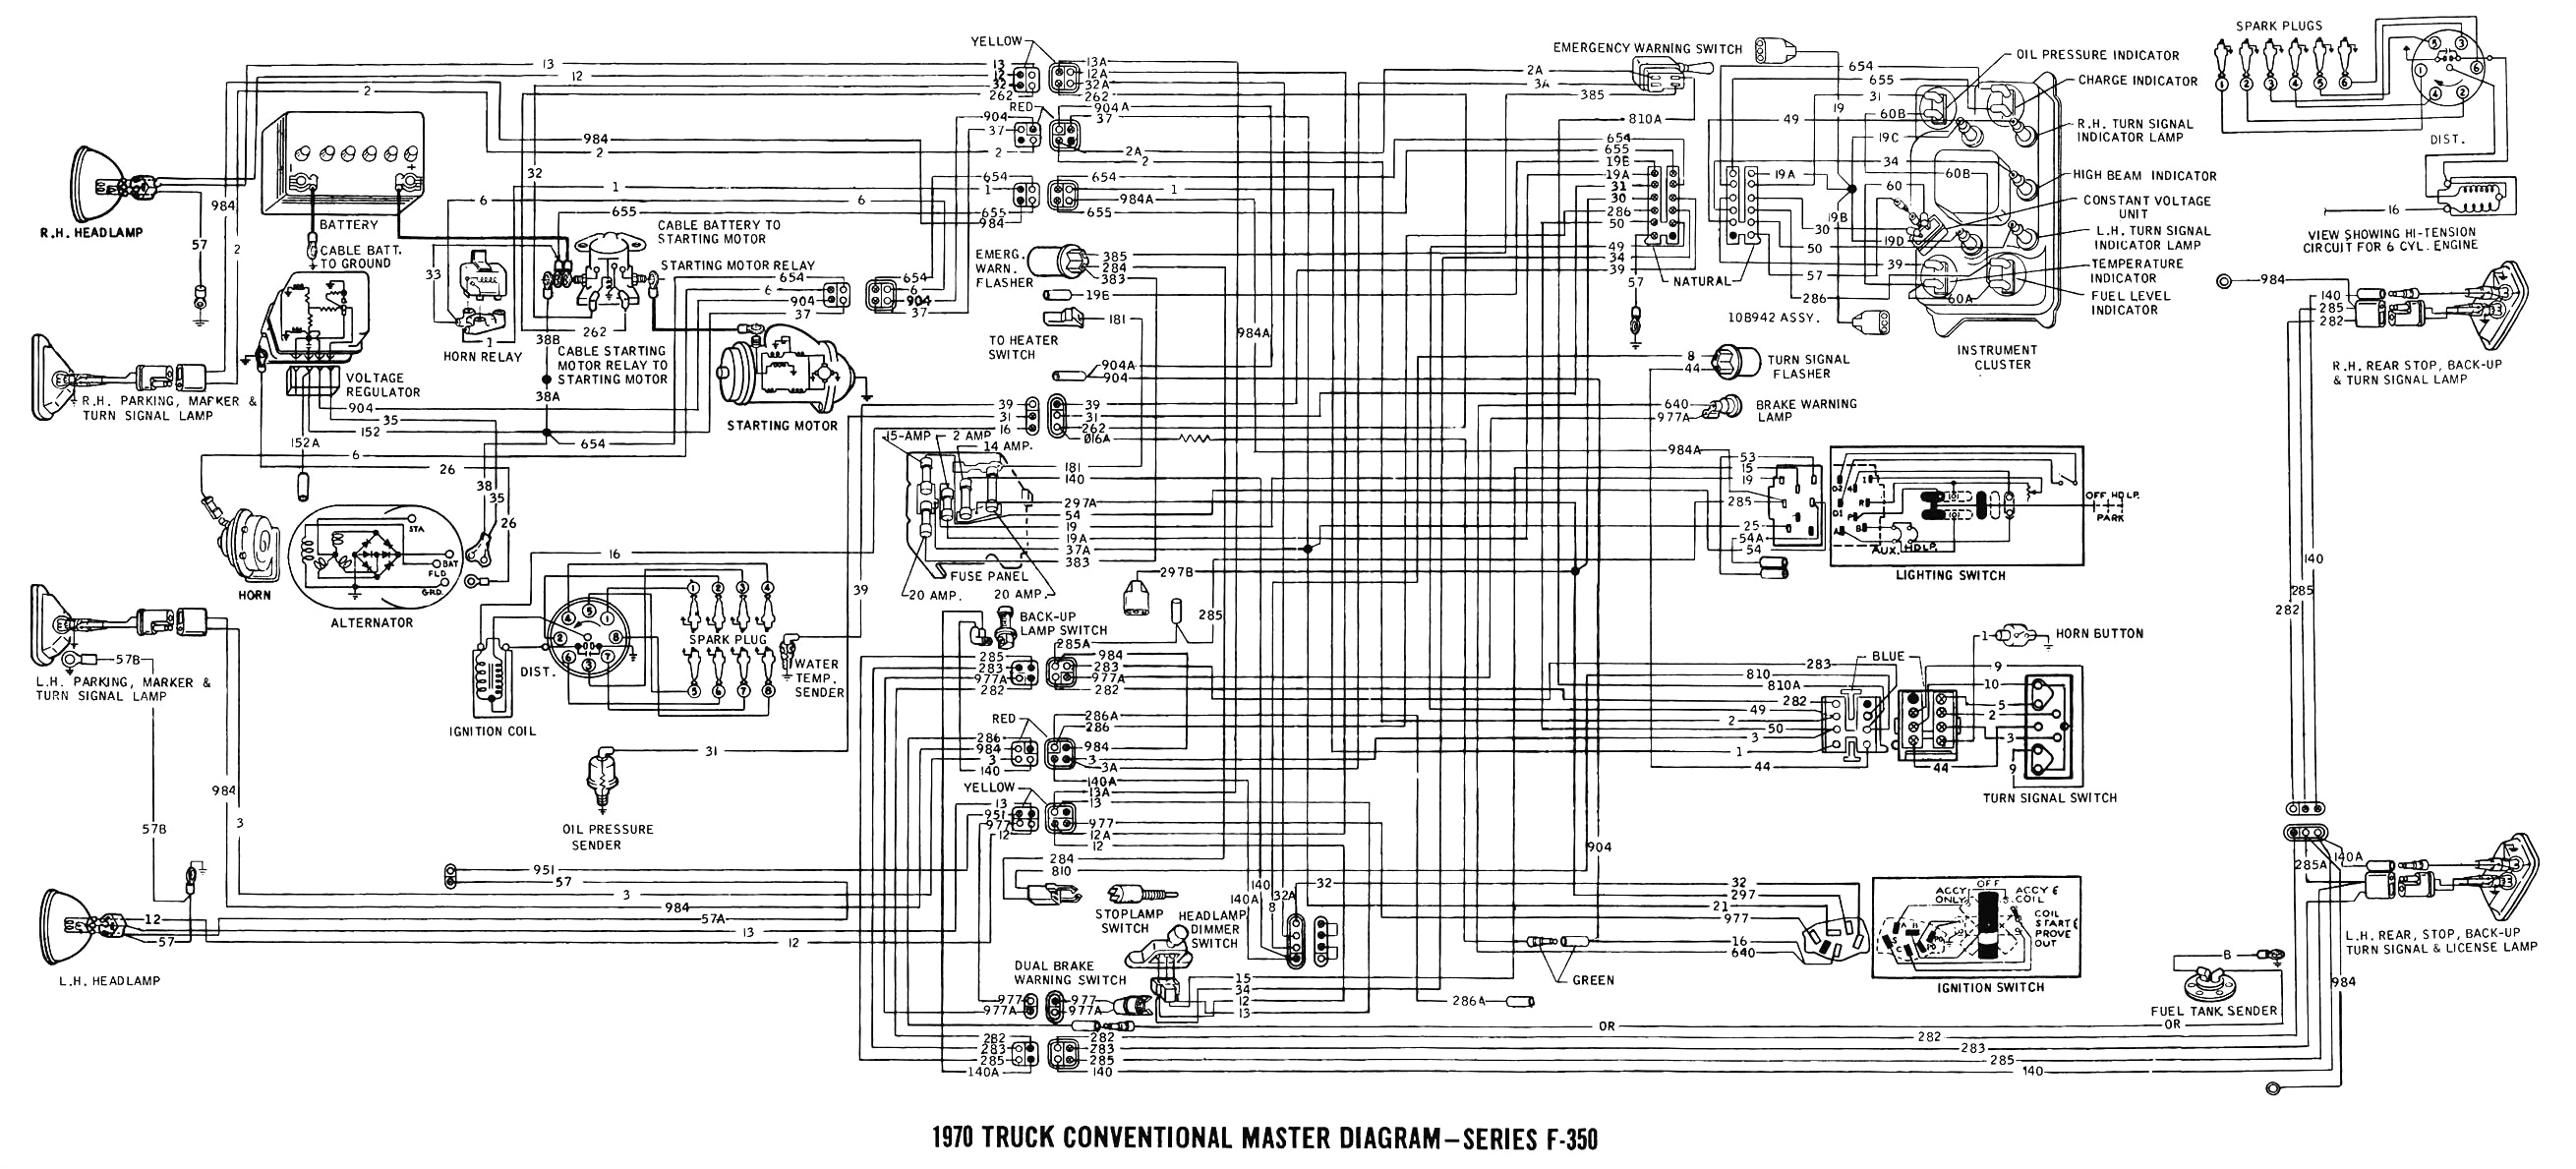 ford 5600 wiring diagram wiring diagram blog ford 5600 wiring diagram 6 best images of 2001